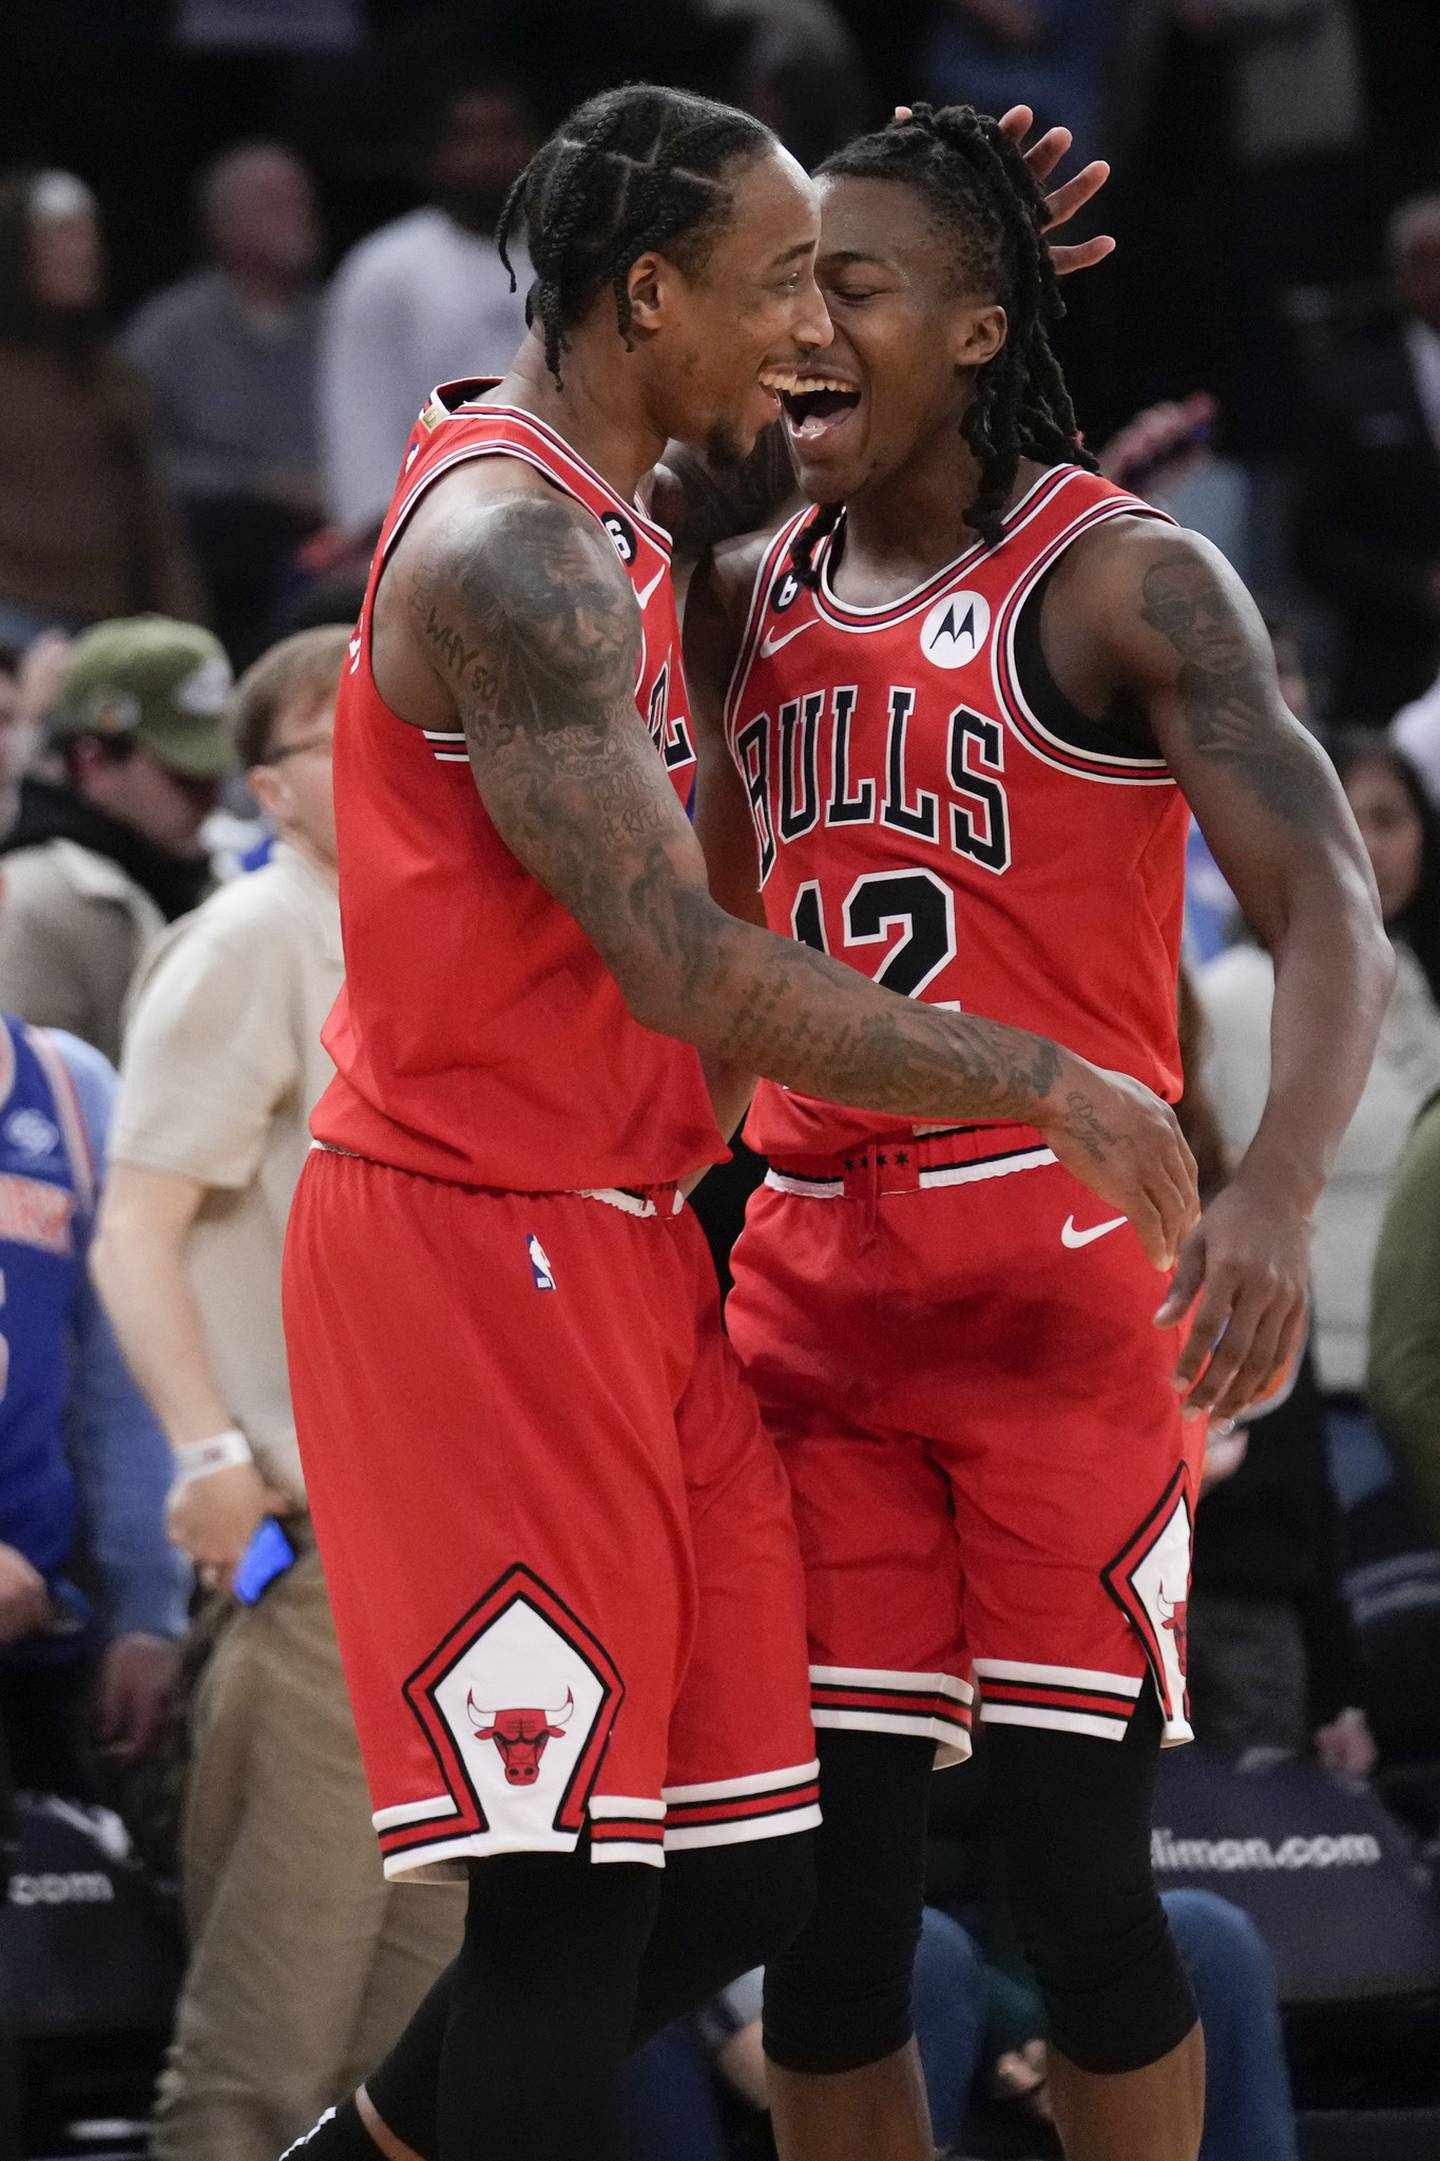 Chicago Bulls' DeMar DeRozan, left, and Ayo Dosunmu celebrate after an NBA basketball game against the New York Knicks, Friday, Dec. 23, 2022, in New York. The Bulls defeated the Knicks 118-117. (AP Photo/Seth Wenig)